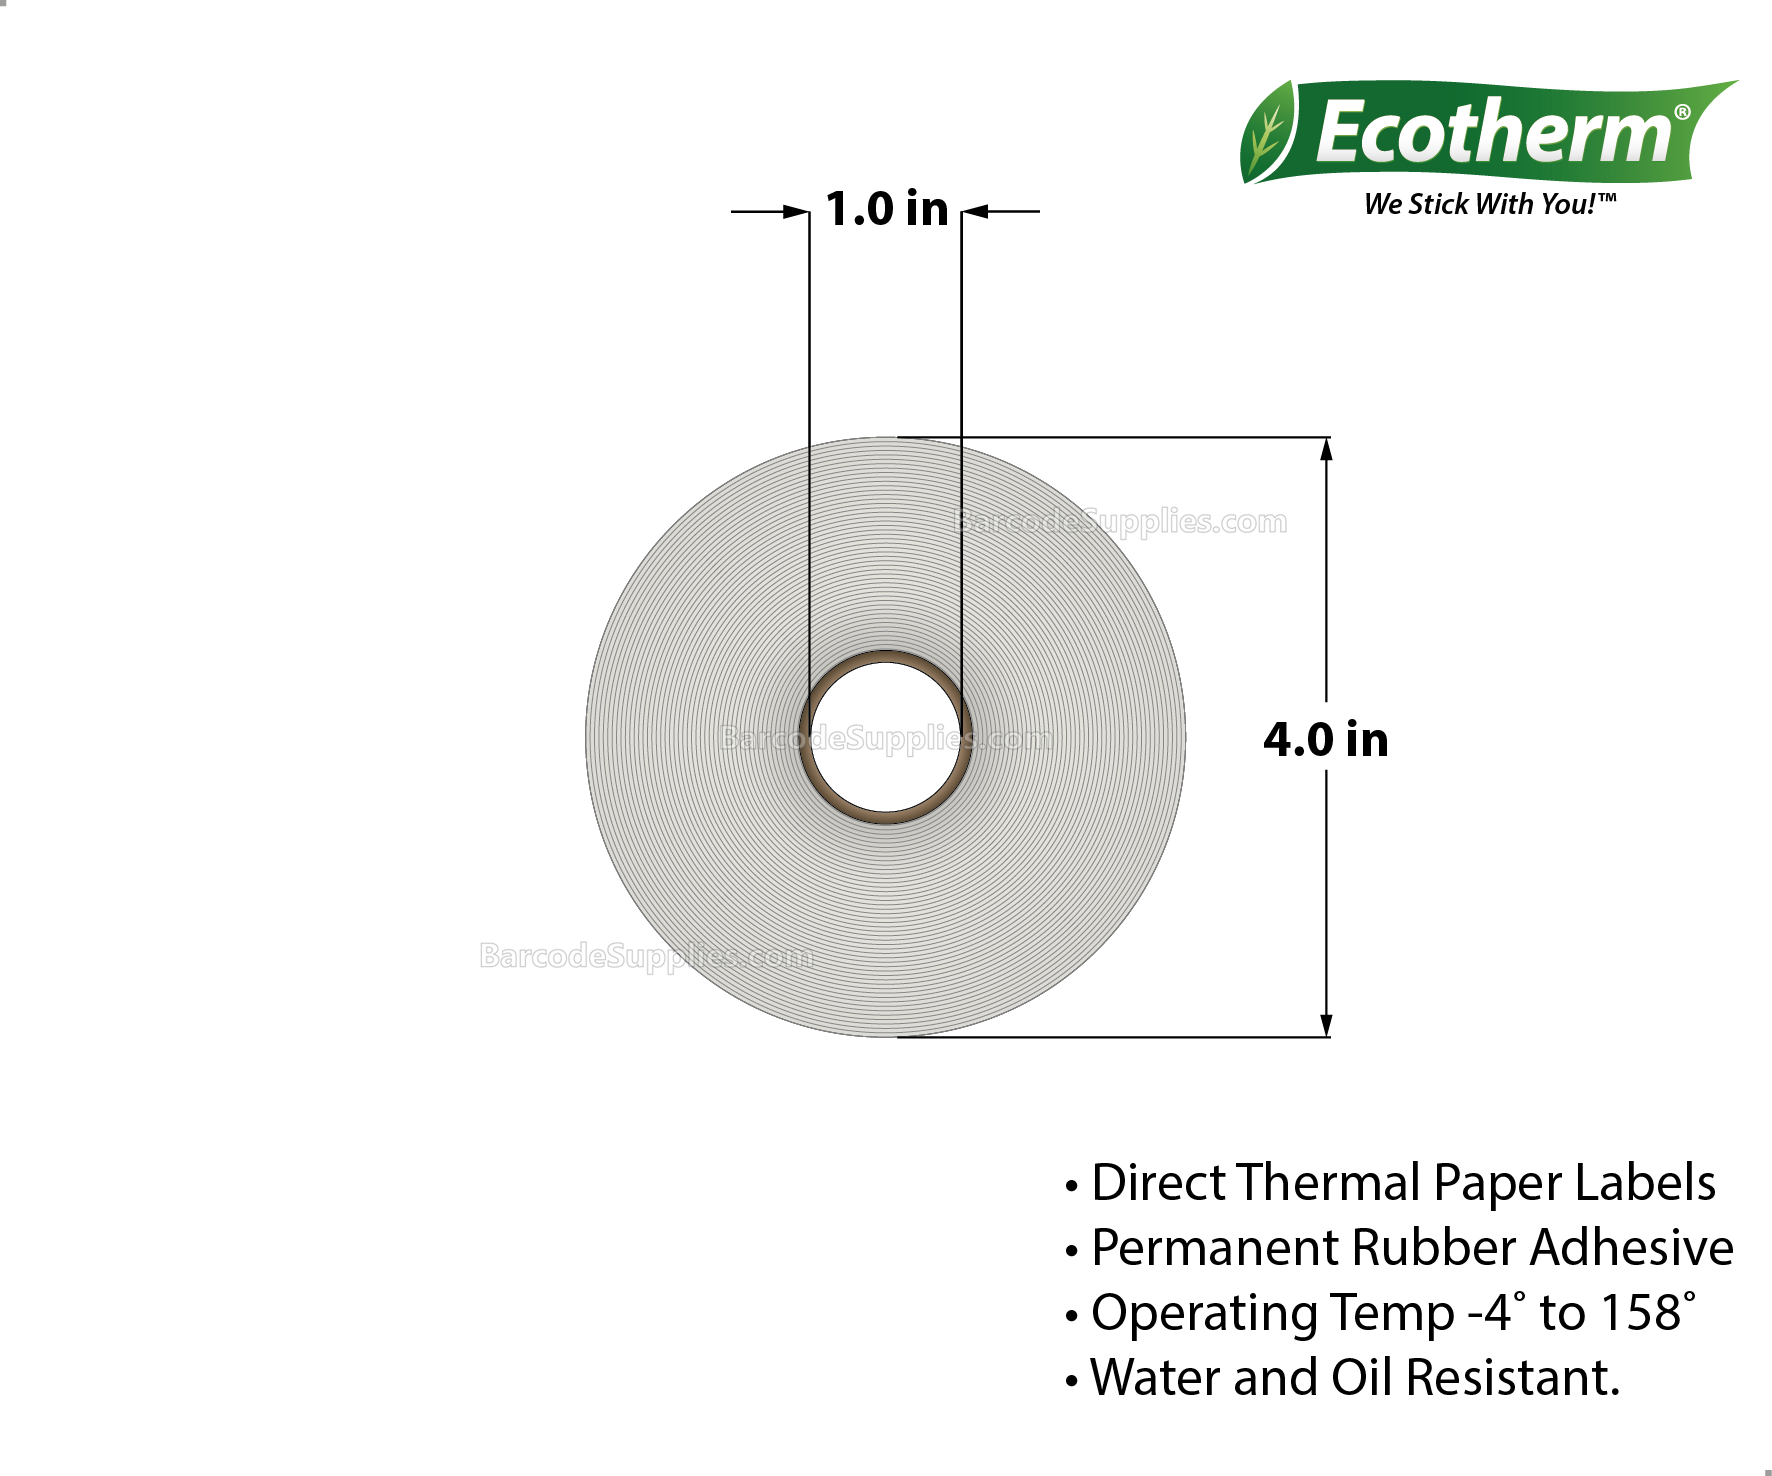 3.5 x 1 Direct Thermal White Labels With Rubber Adhesive - Perforated - 1340 Labels Per Roll - Carton Of 4 Rolls - 5360 Labels Total - MPN: ECOTHERM14124-4